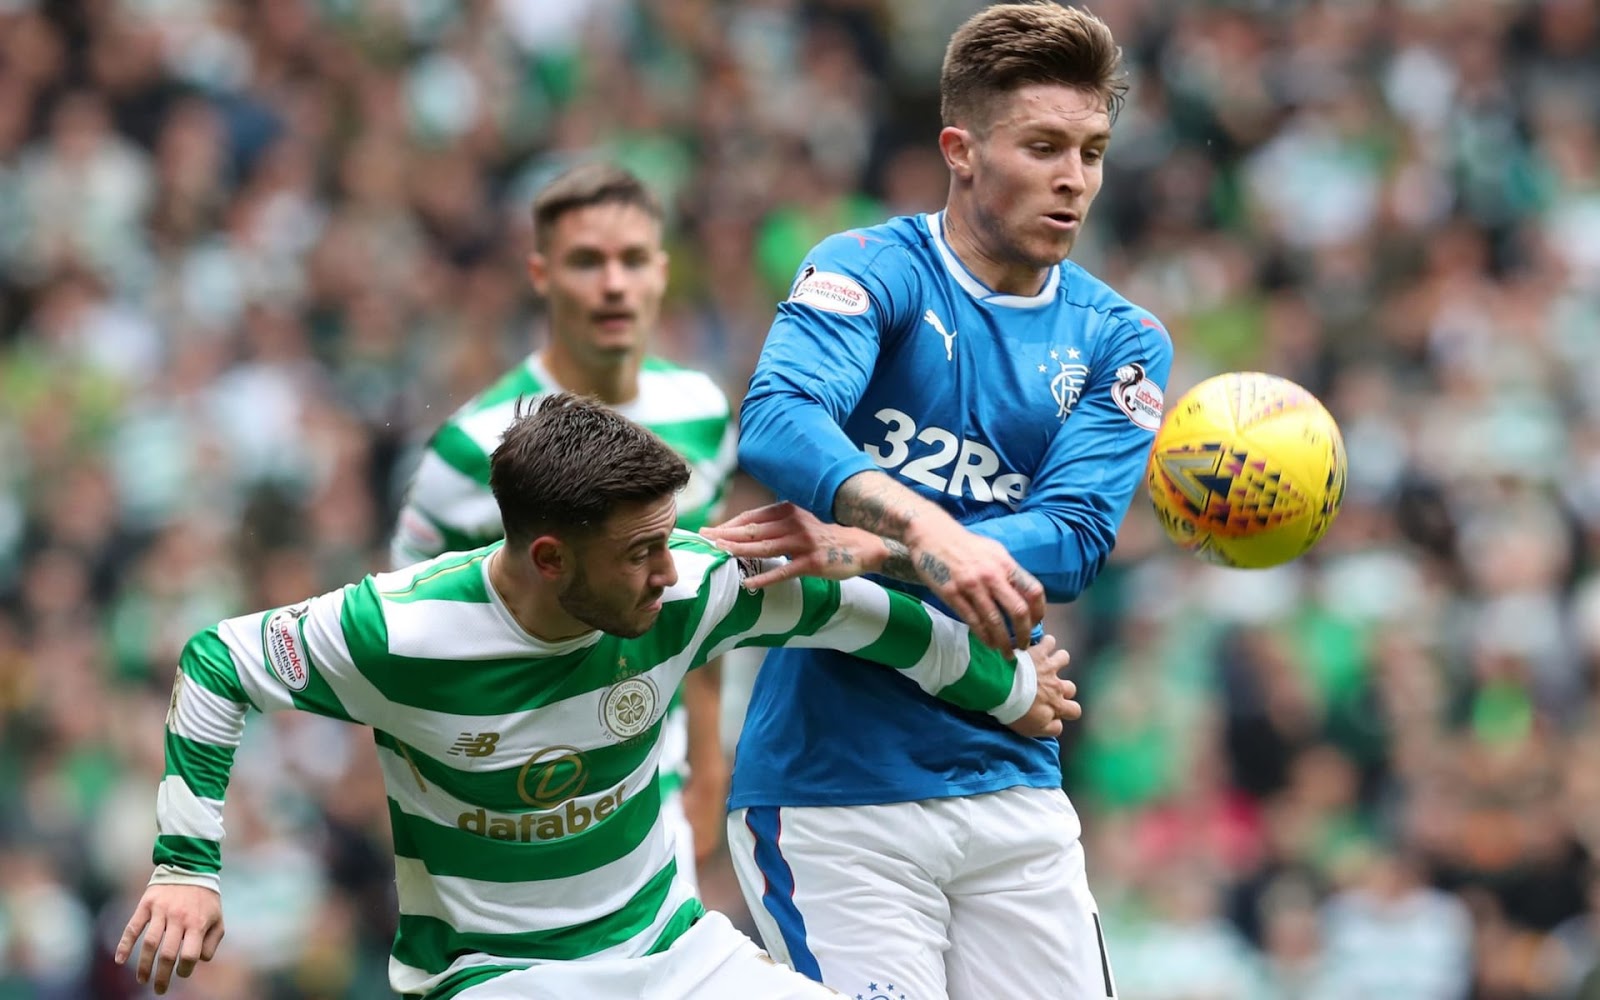 Old Firm misery – where do Rangers go from here?